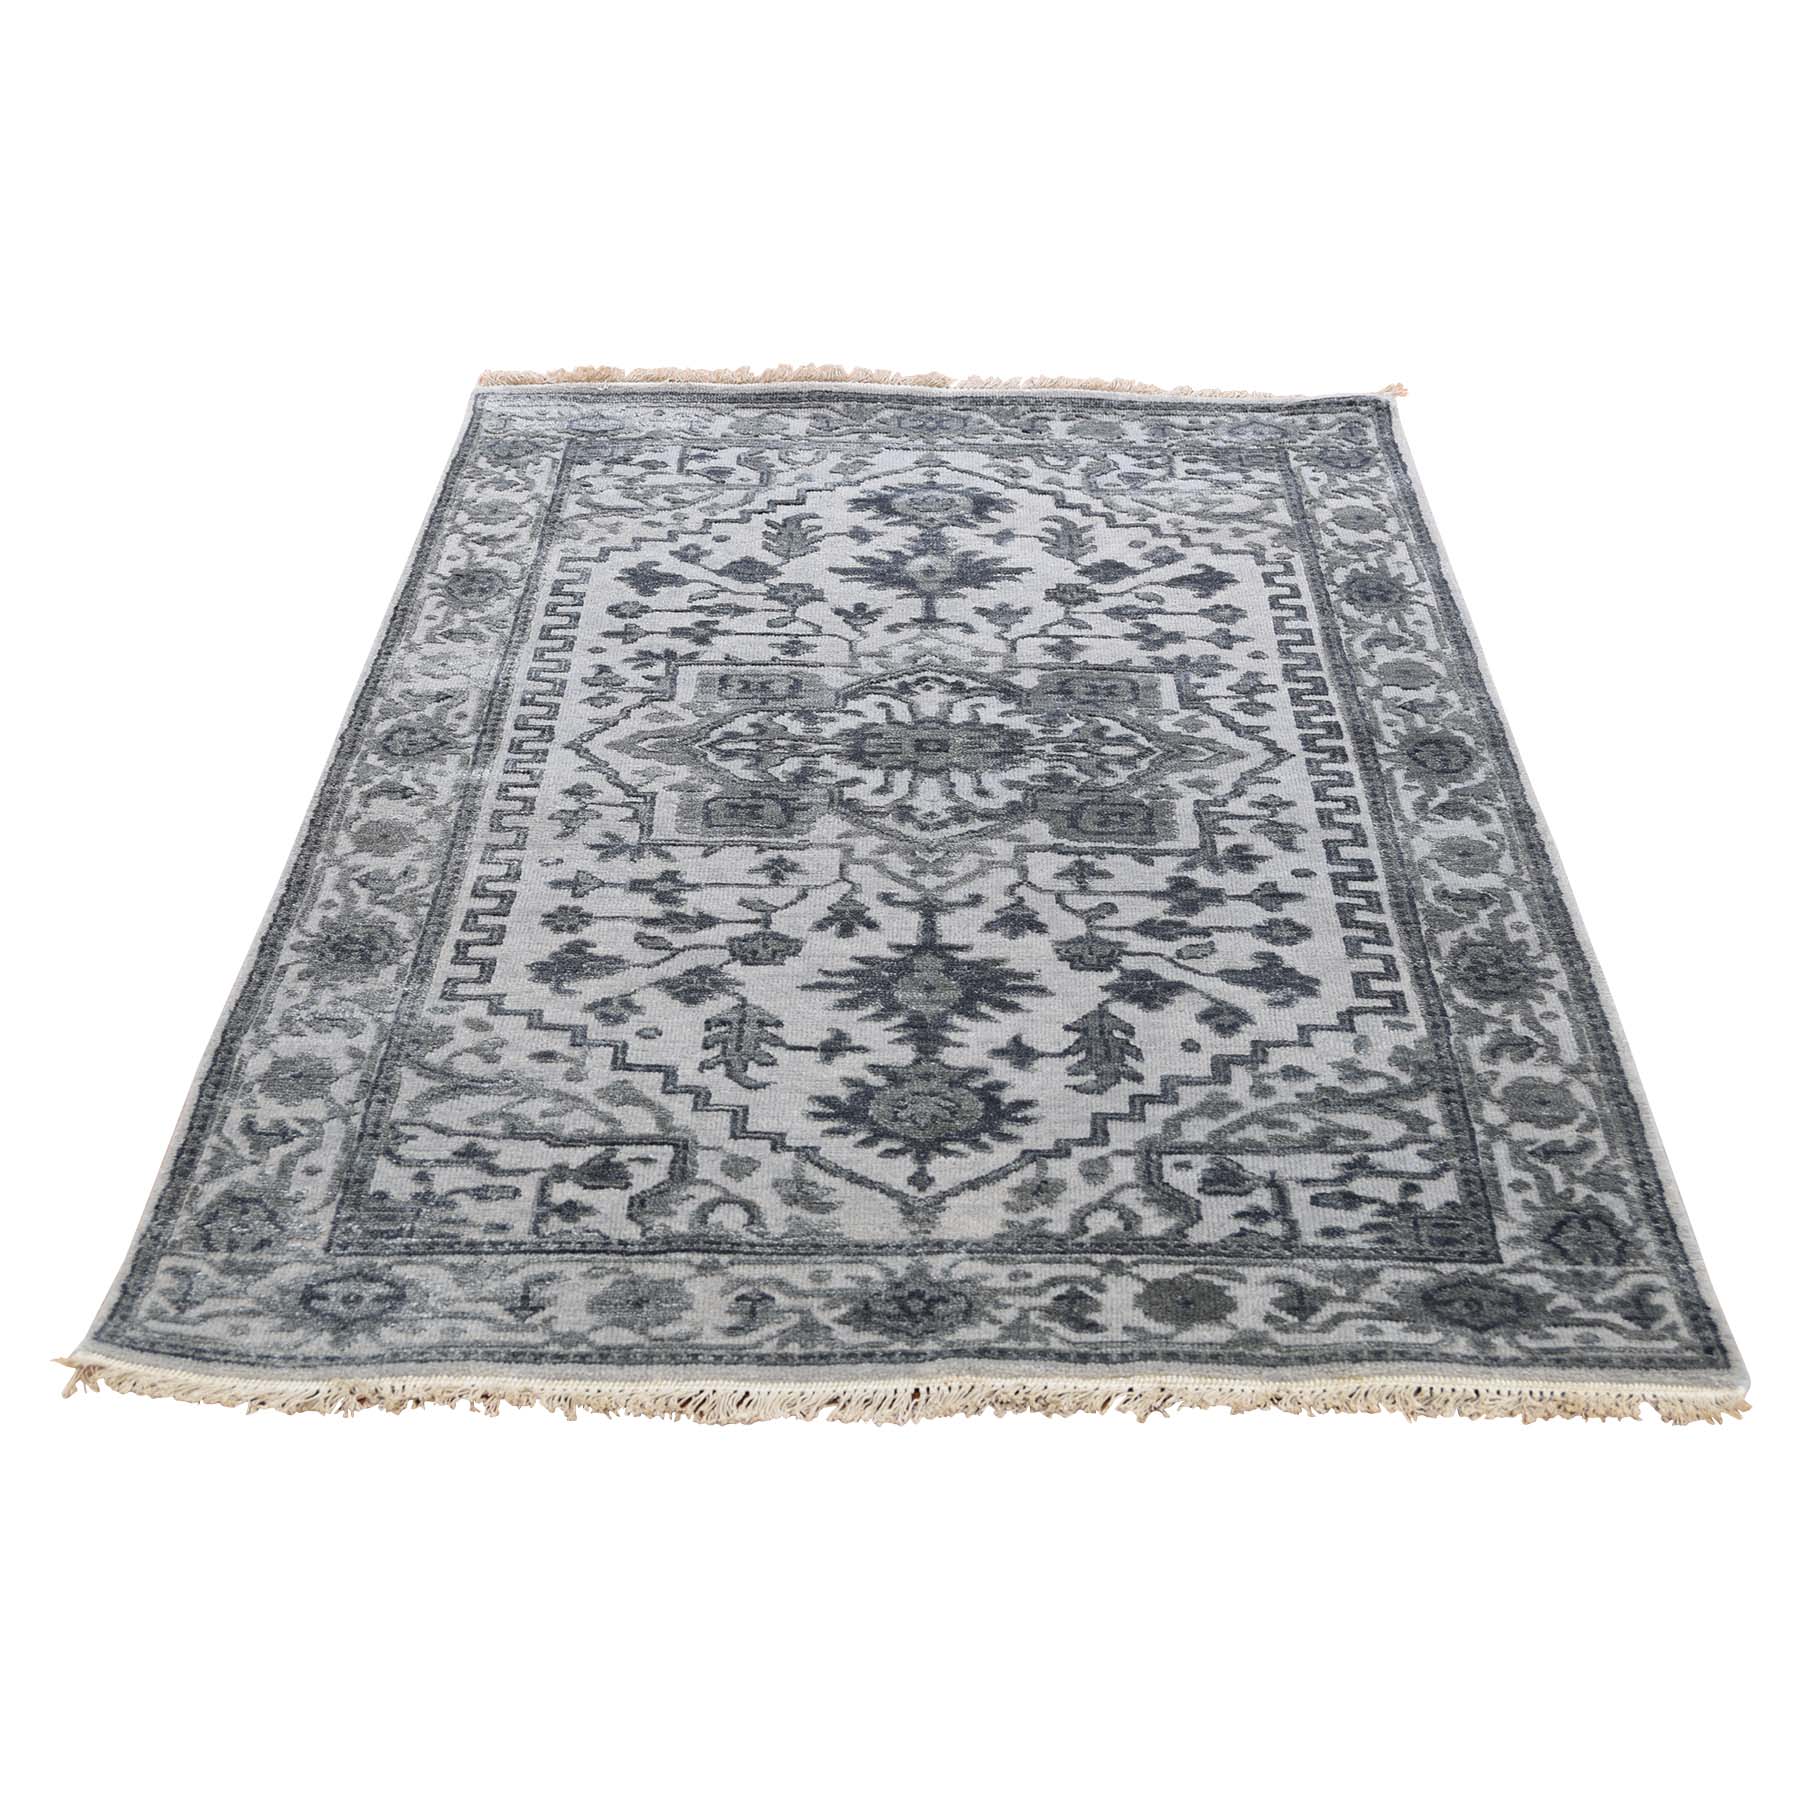 3'1"X5'2" Silver Heriz Design Wool And Silk Hi-Lo Pile Hand-Knotted Oriental Rug moadd90e